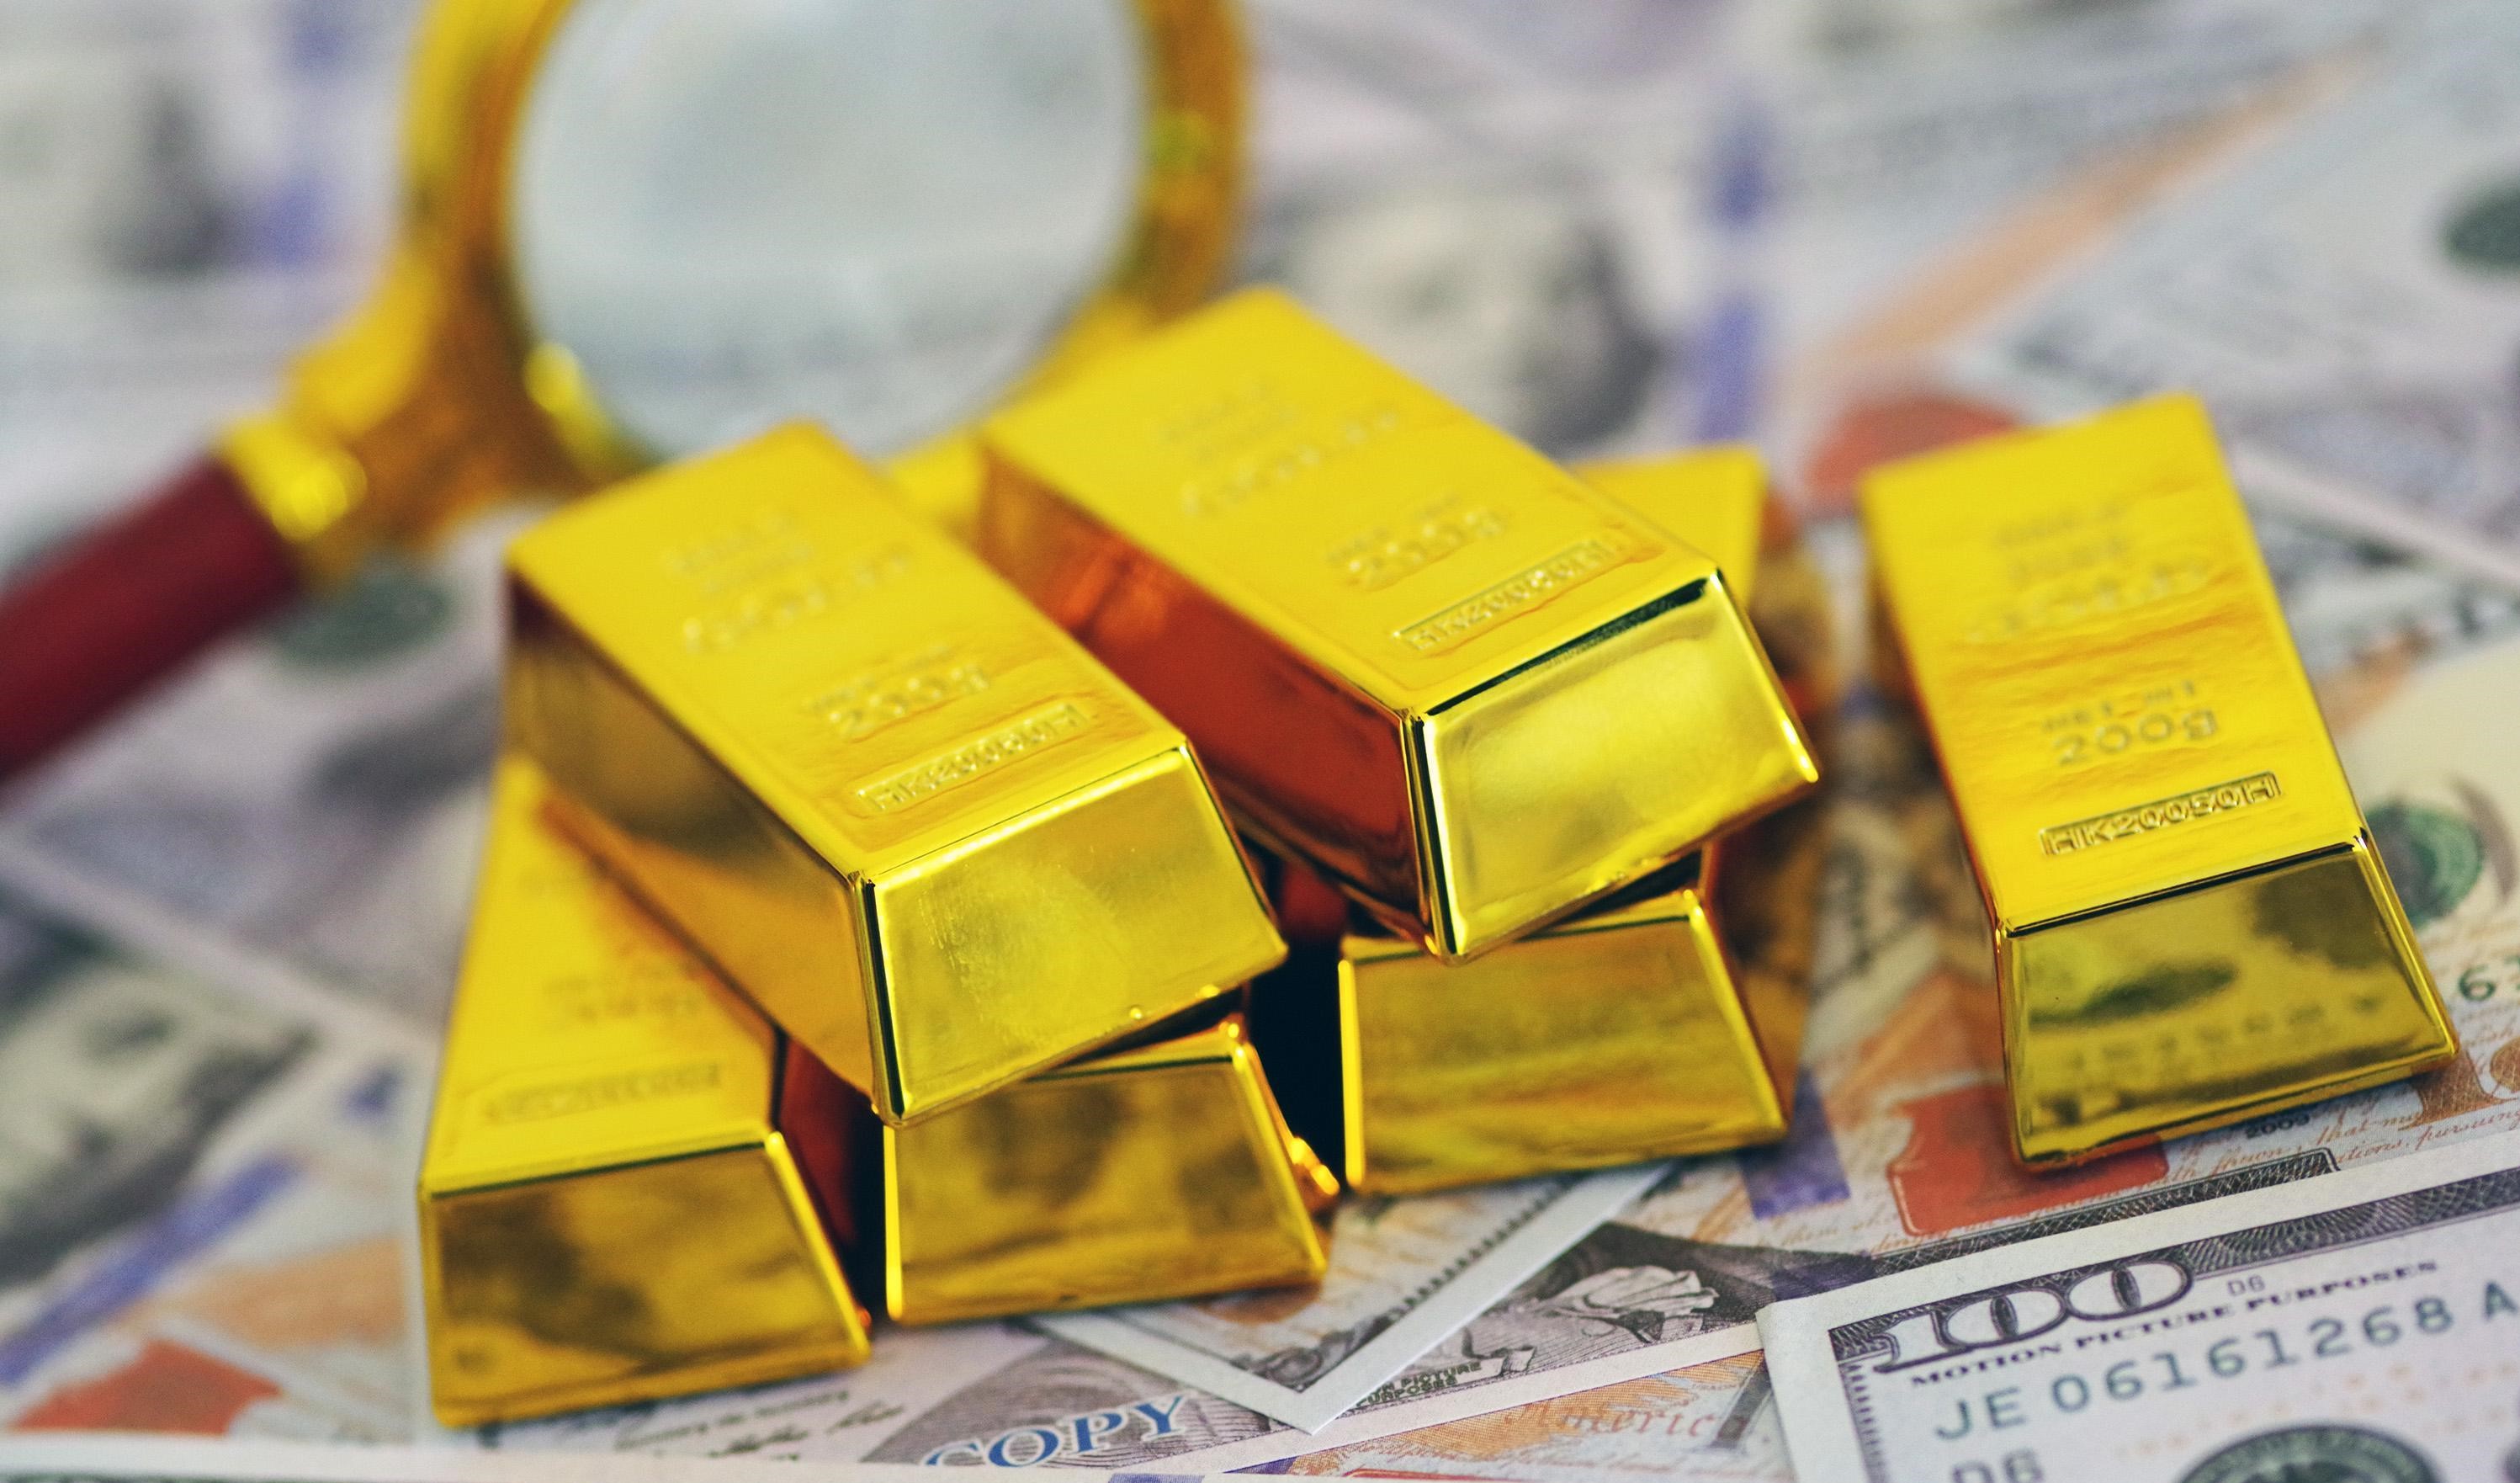 gold bars are placing on the USD, which is attractive to traders